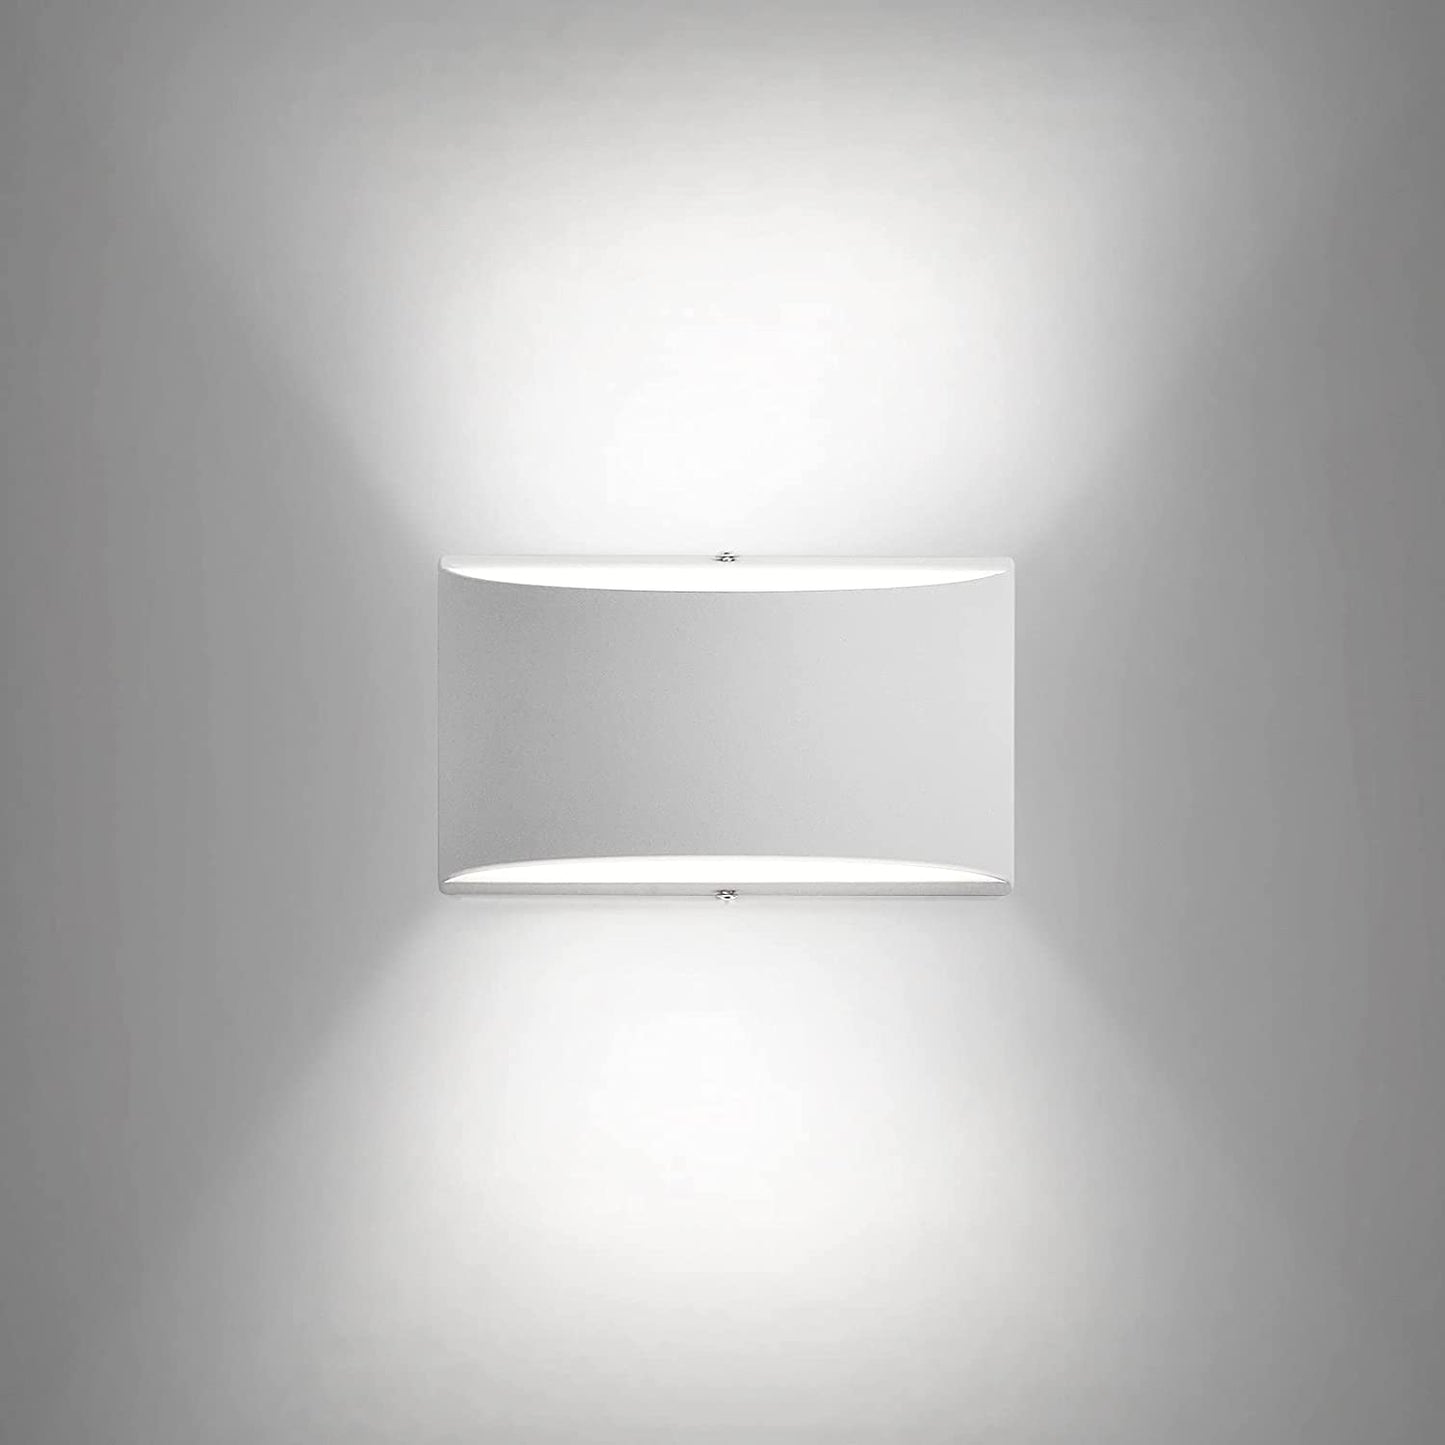 Modern LED Wall Sconce,Up and Down Indoor Wall Lamps, Wall Lighting Fixture Lamps, Interior Wall Lights for Living Room, Bedroom, Hallway,Corridor,Conservatory Cool White 6000K(1PCS Wall Sconce)